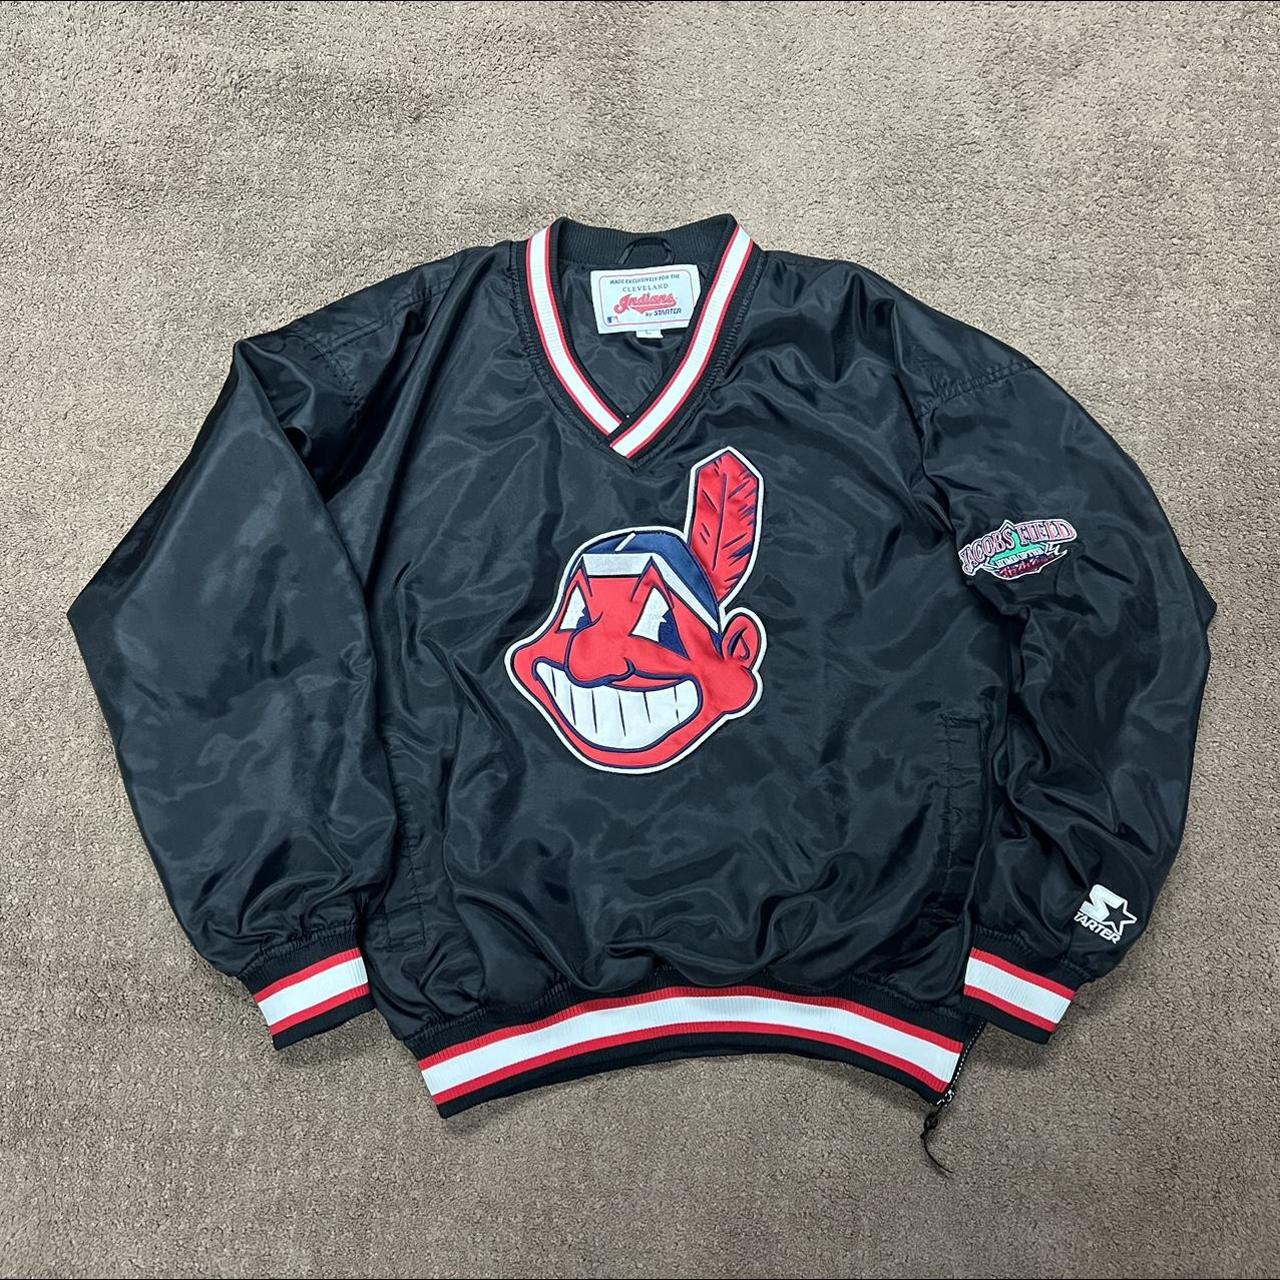 cleveland indians pullover jersey